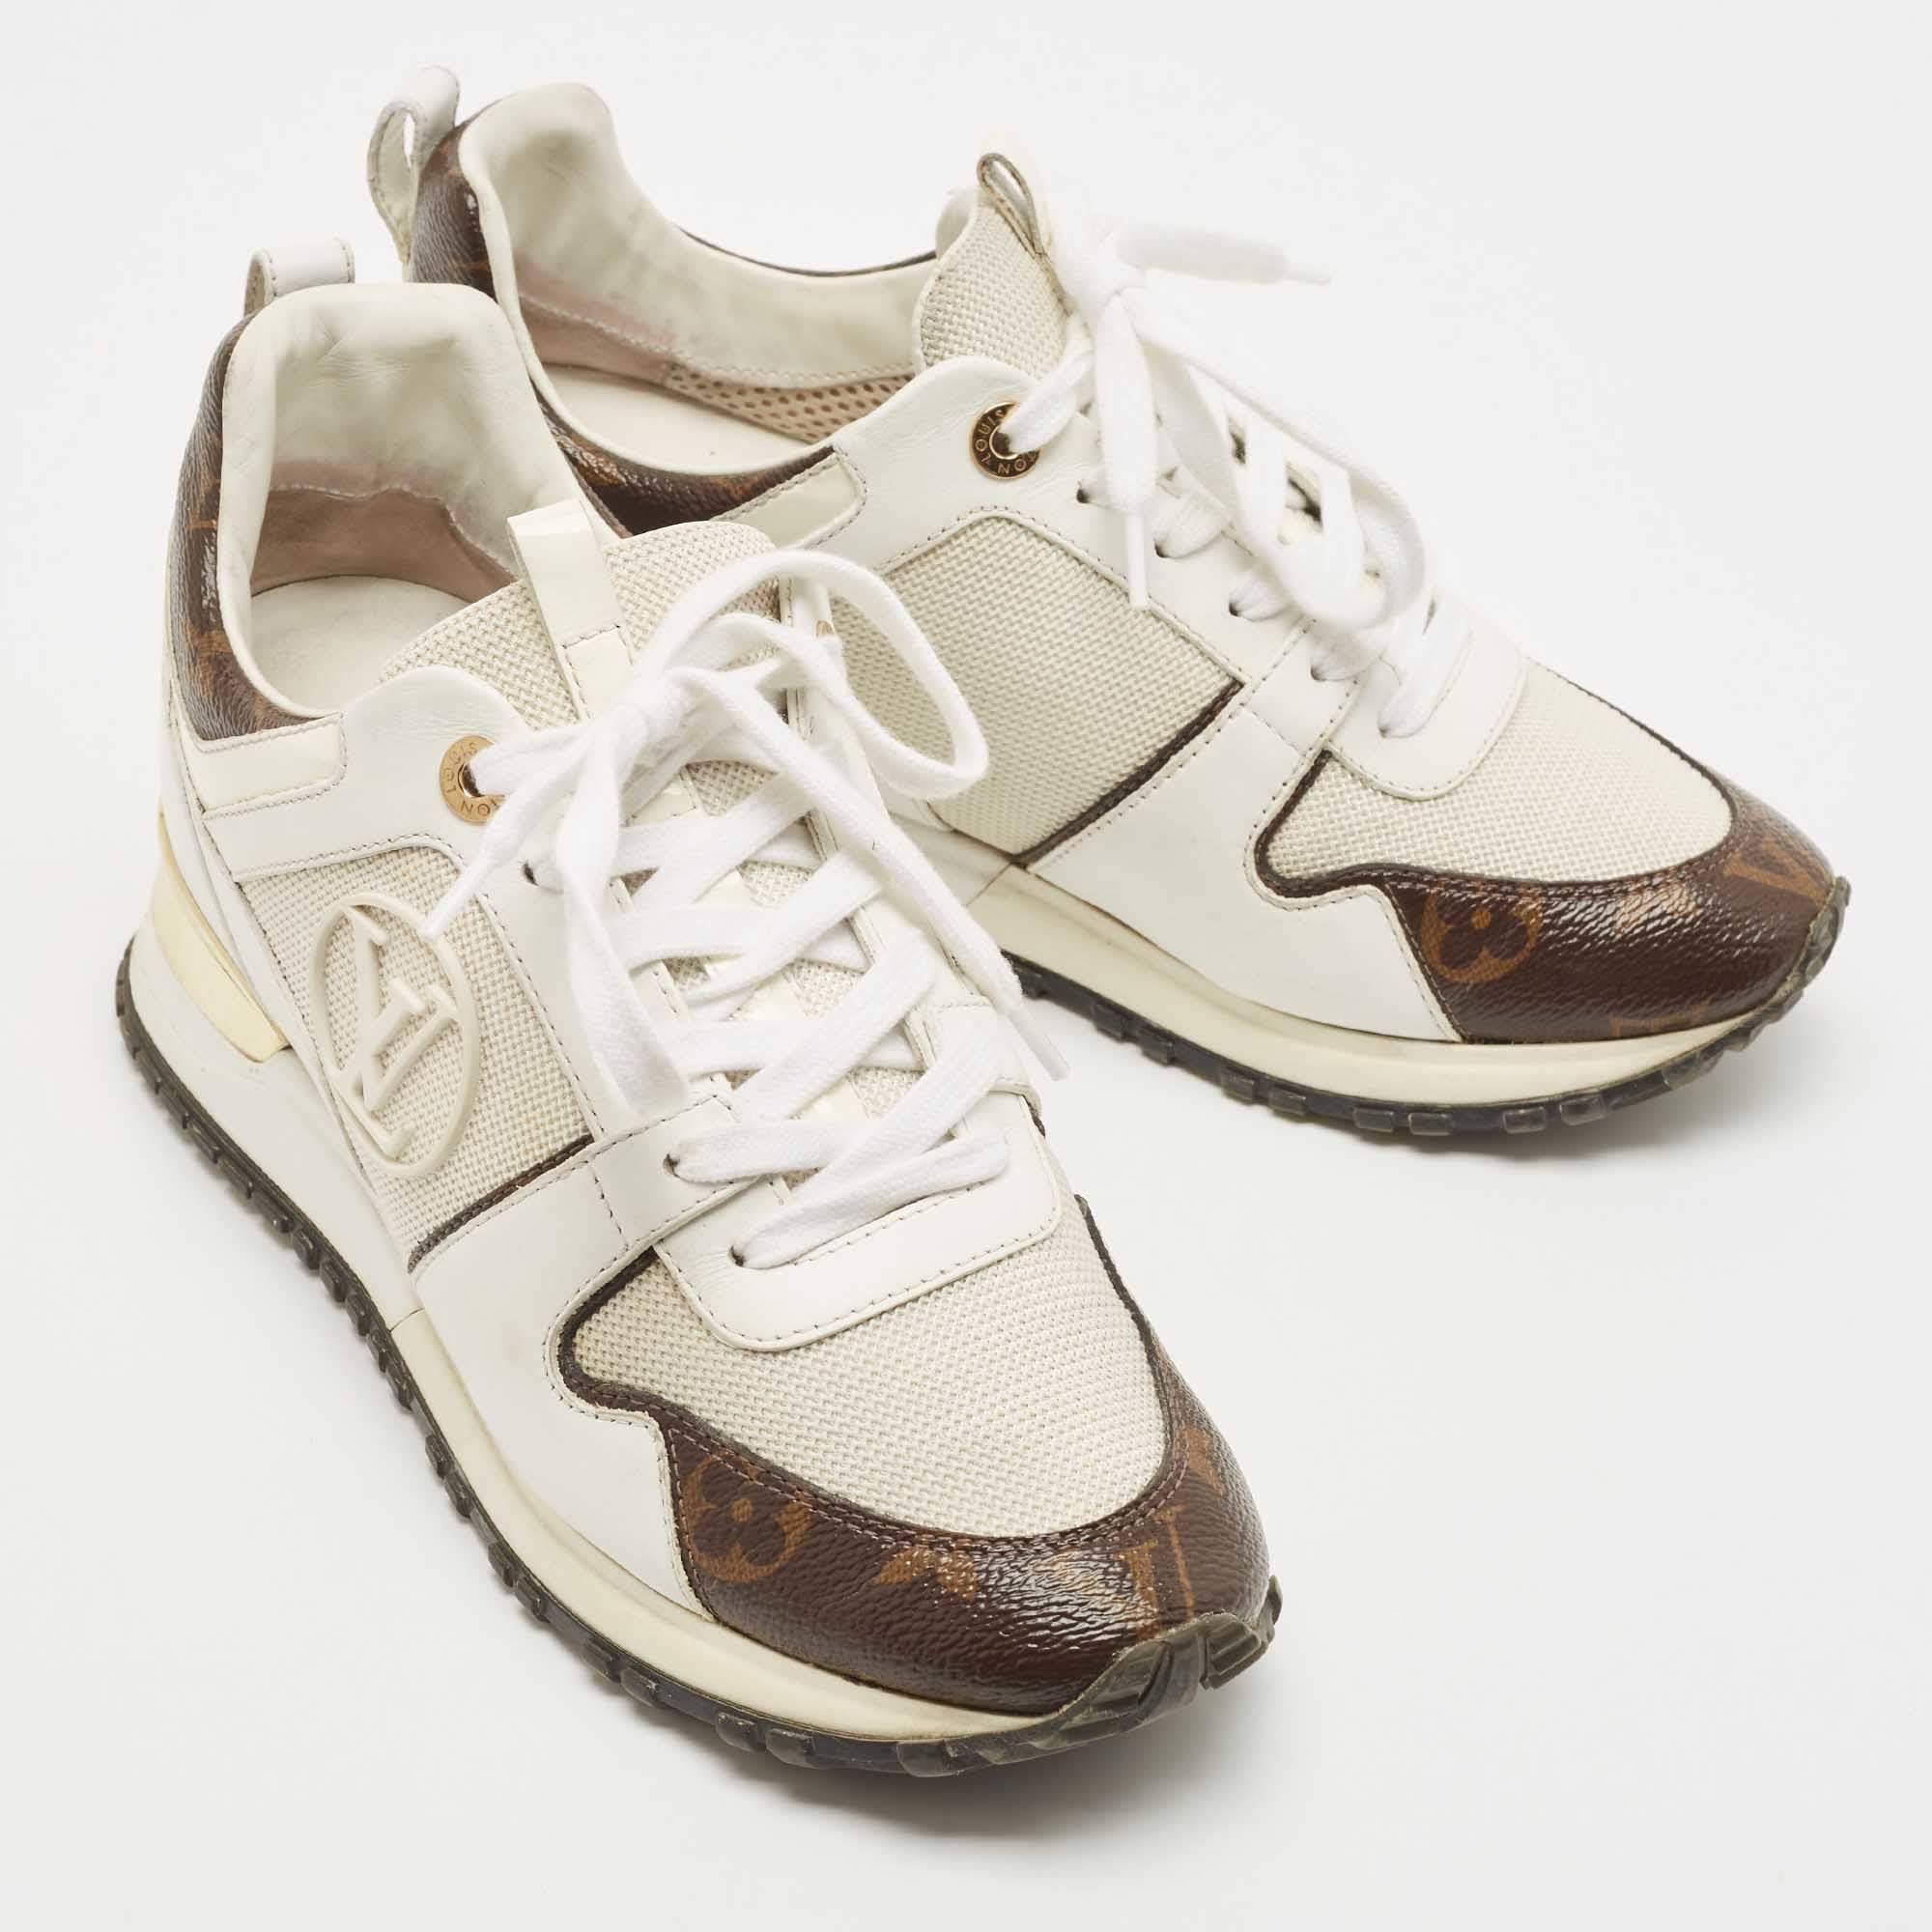 Run away leather trainers Louis Vuitton White size 37.5 EU in Leather -  29365448